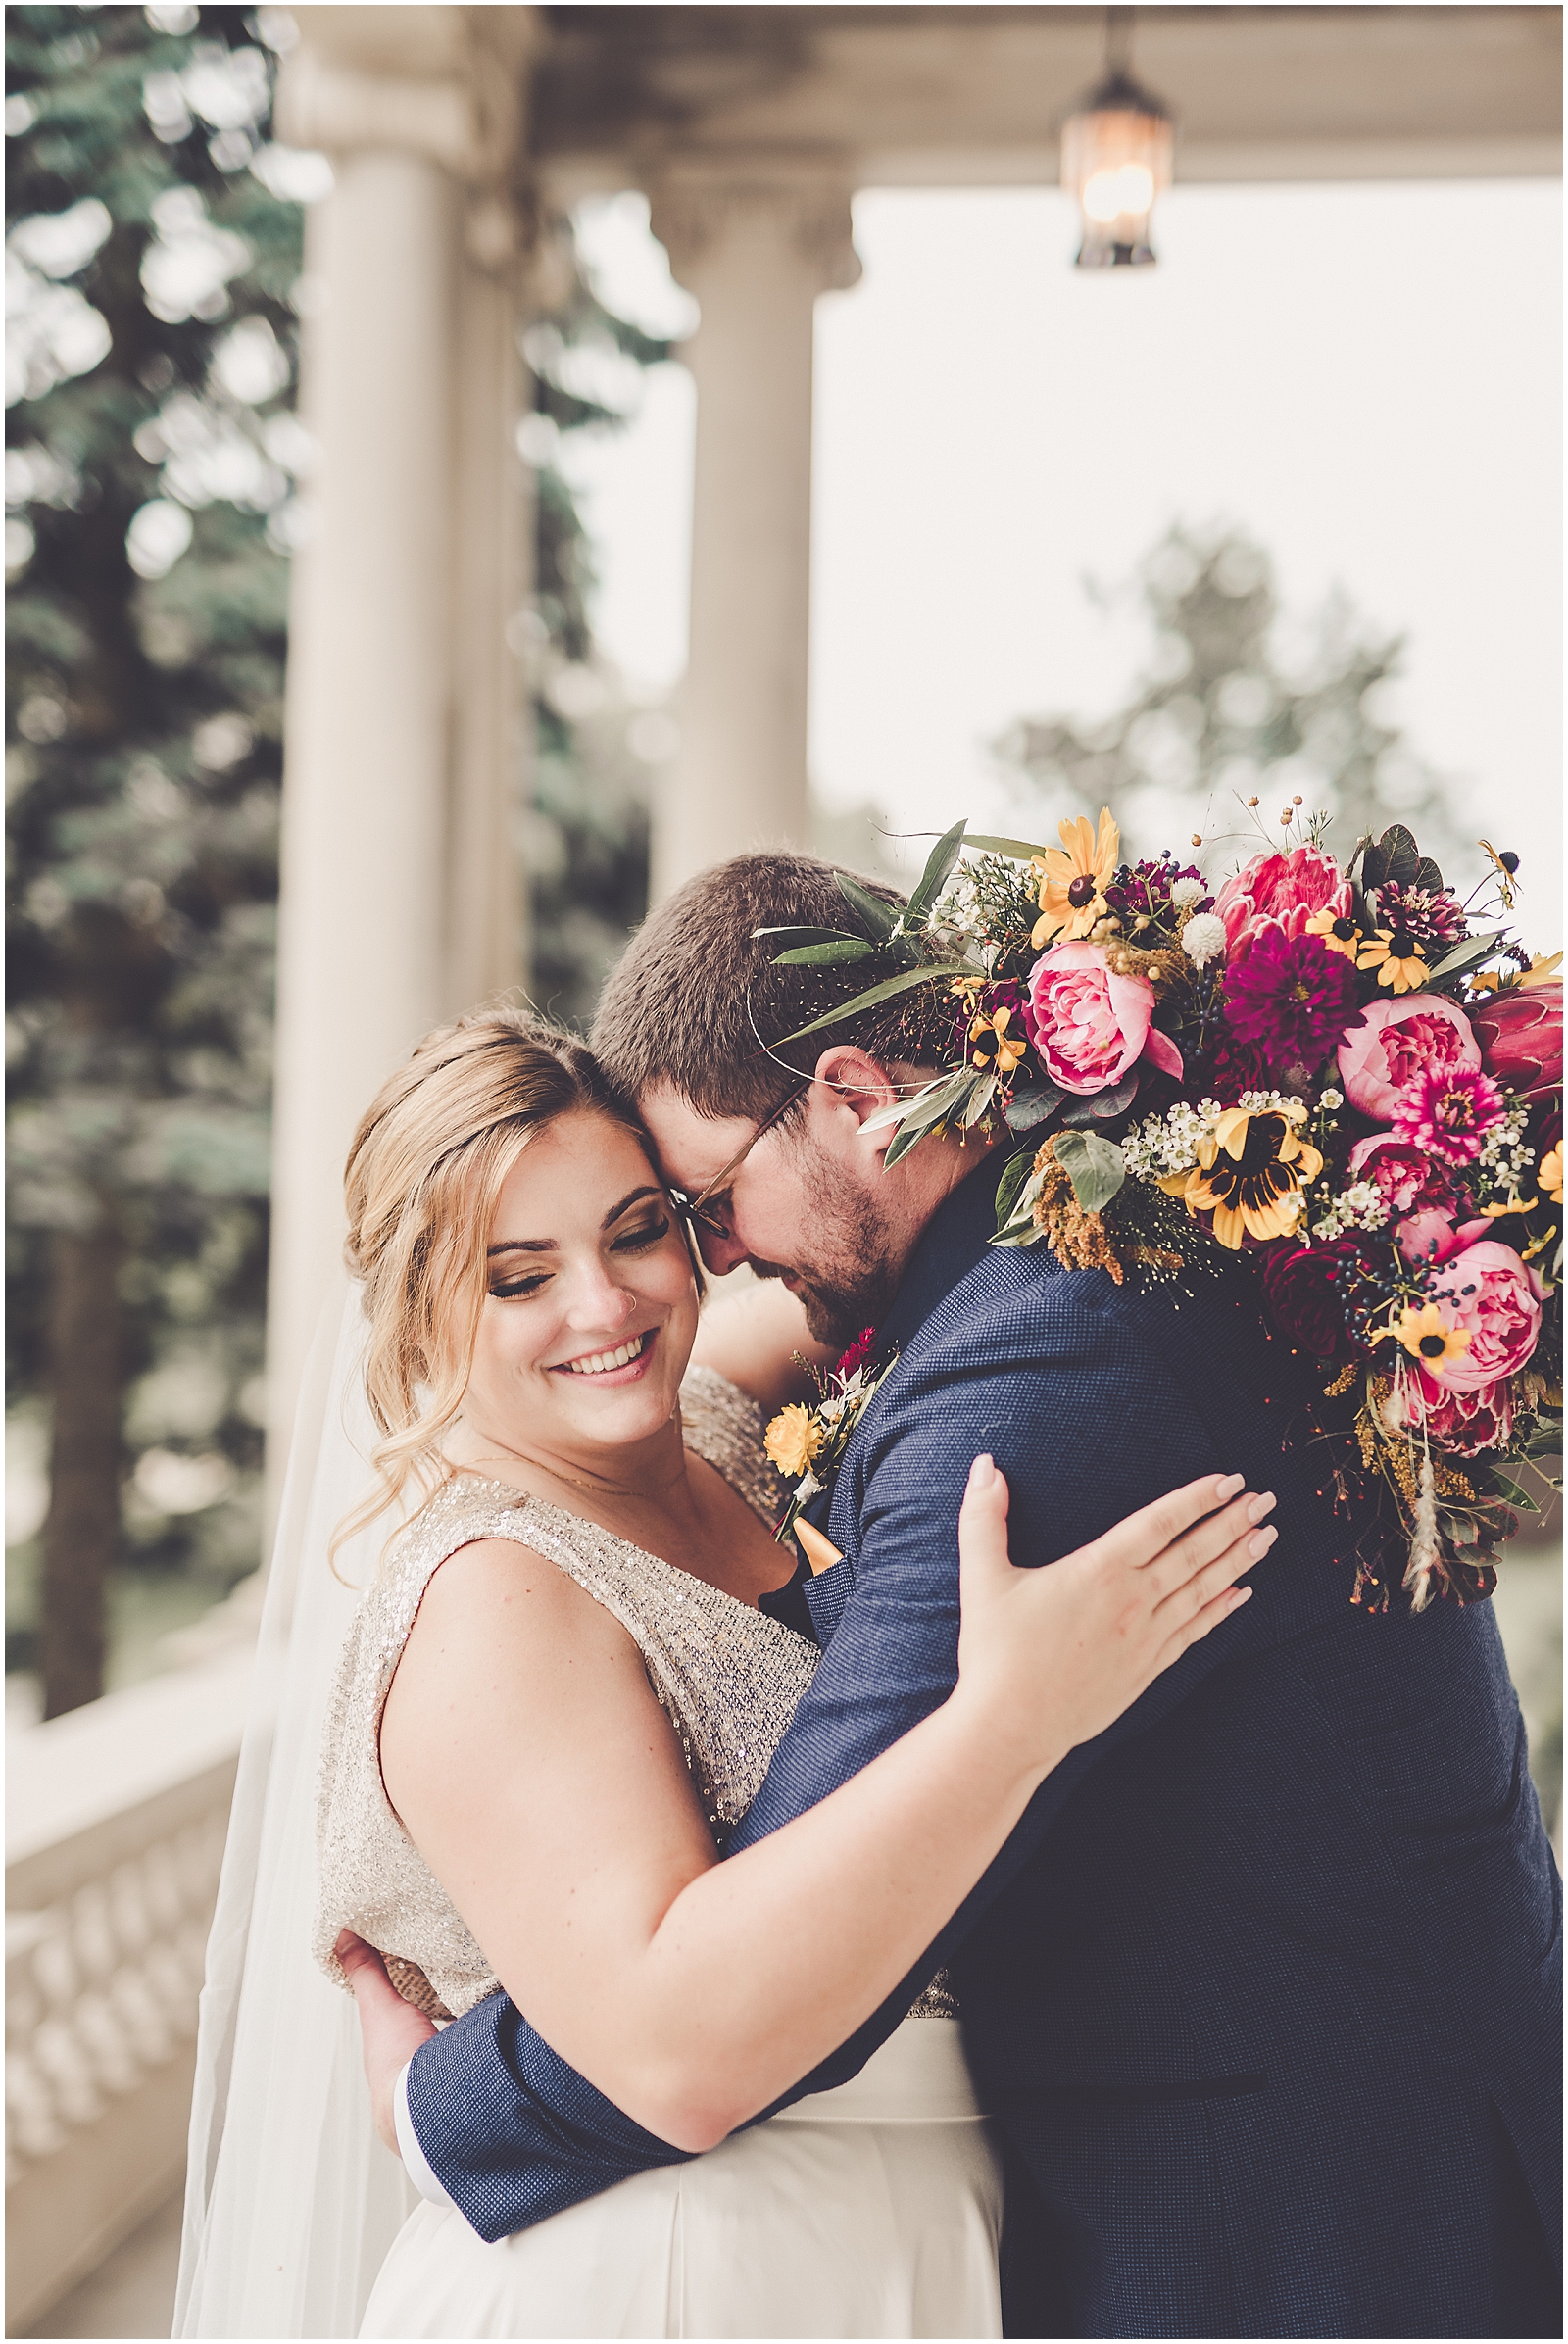 Janet and Michael's colorful summer backyard wedding in Bourbonnais, IL with Chicagoland wedding photographer Kara Evans Photographer.